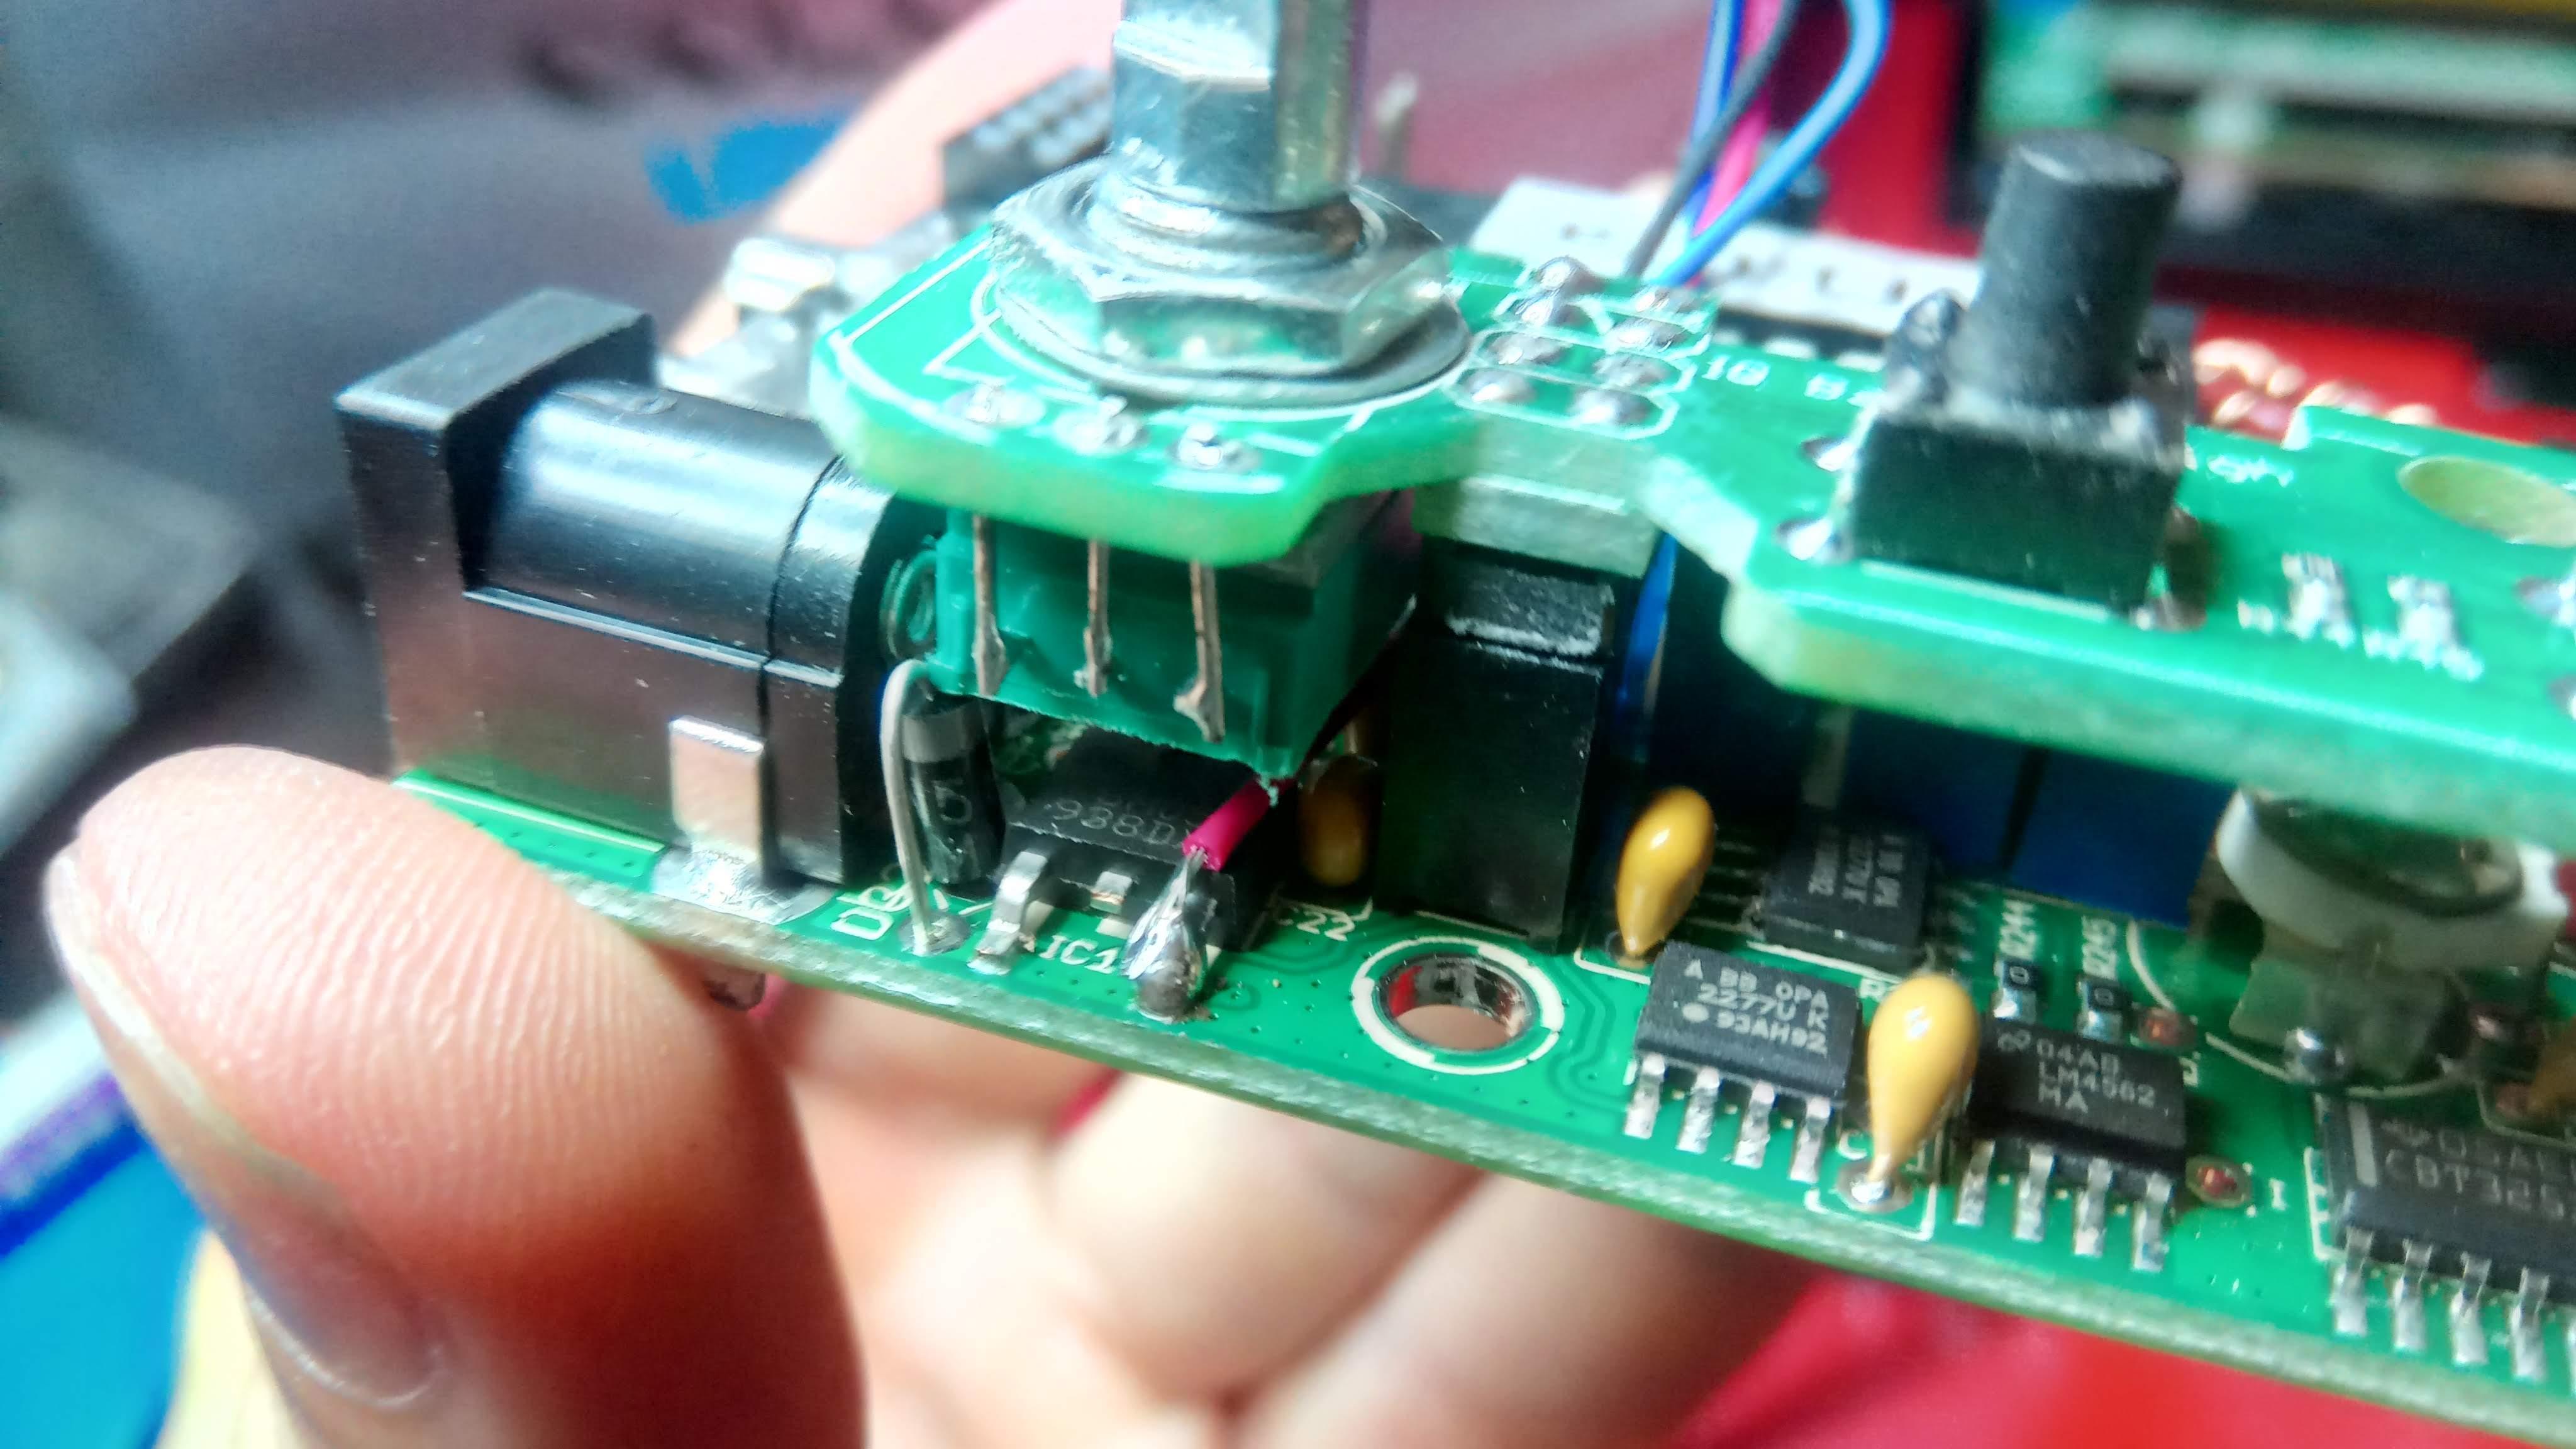 QCX-mini rev. 2, note red +5V wire soldered to the rightmost contact of IC11